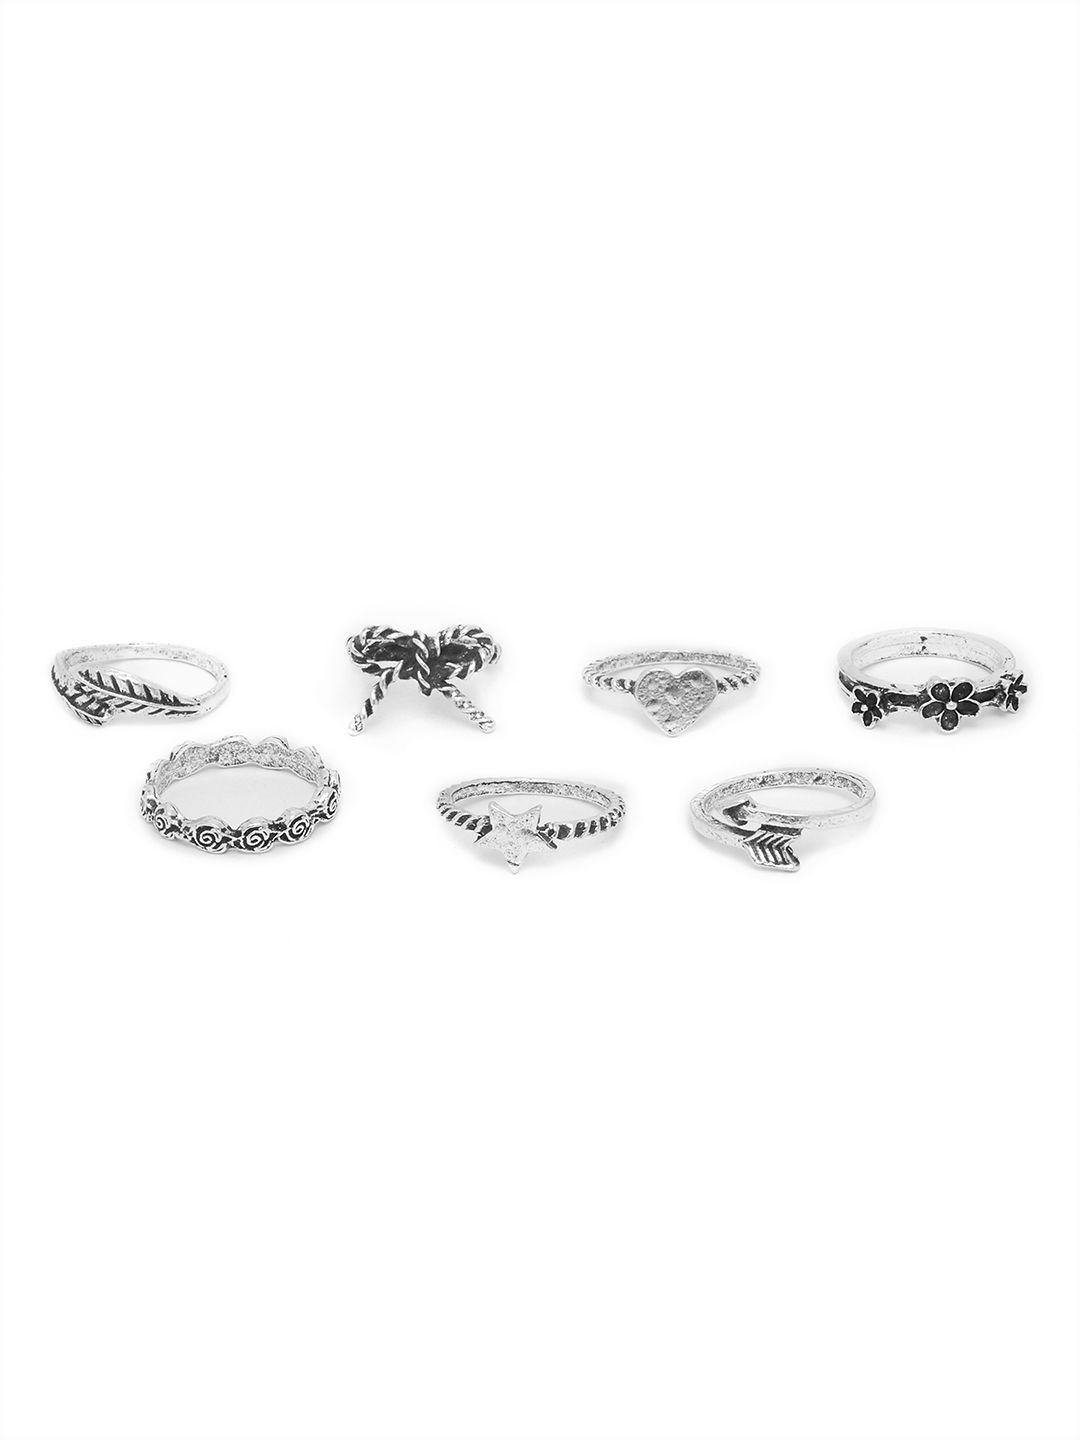 URBANIC Oxidised Pack of 7 Silver-Toned Mismatch Finger Ring Set Price in India